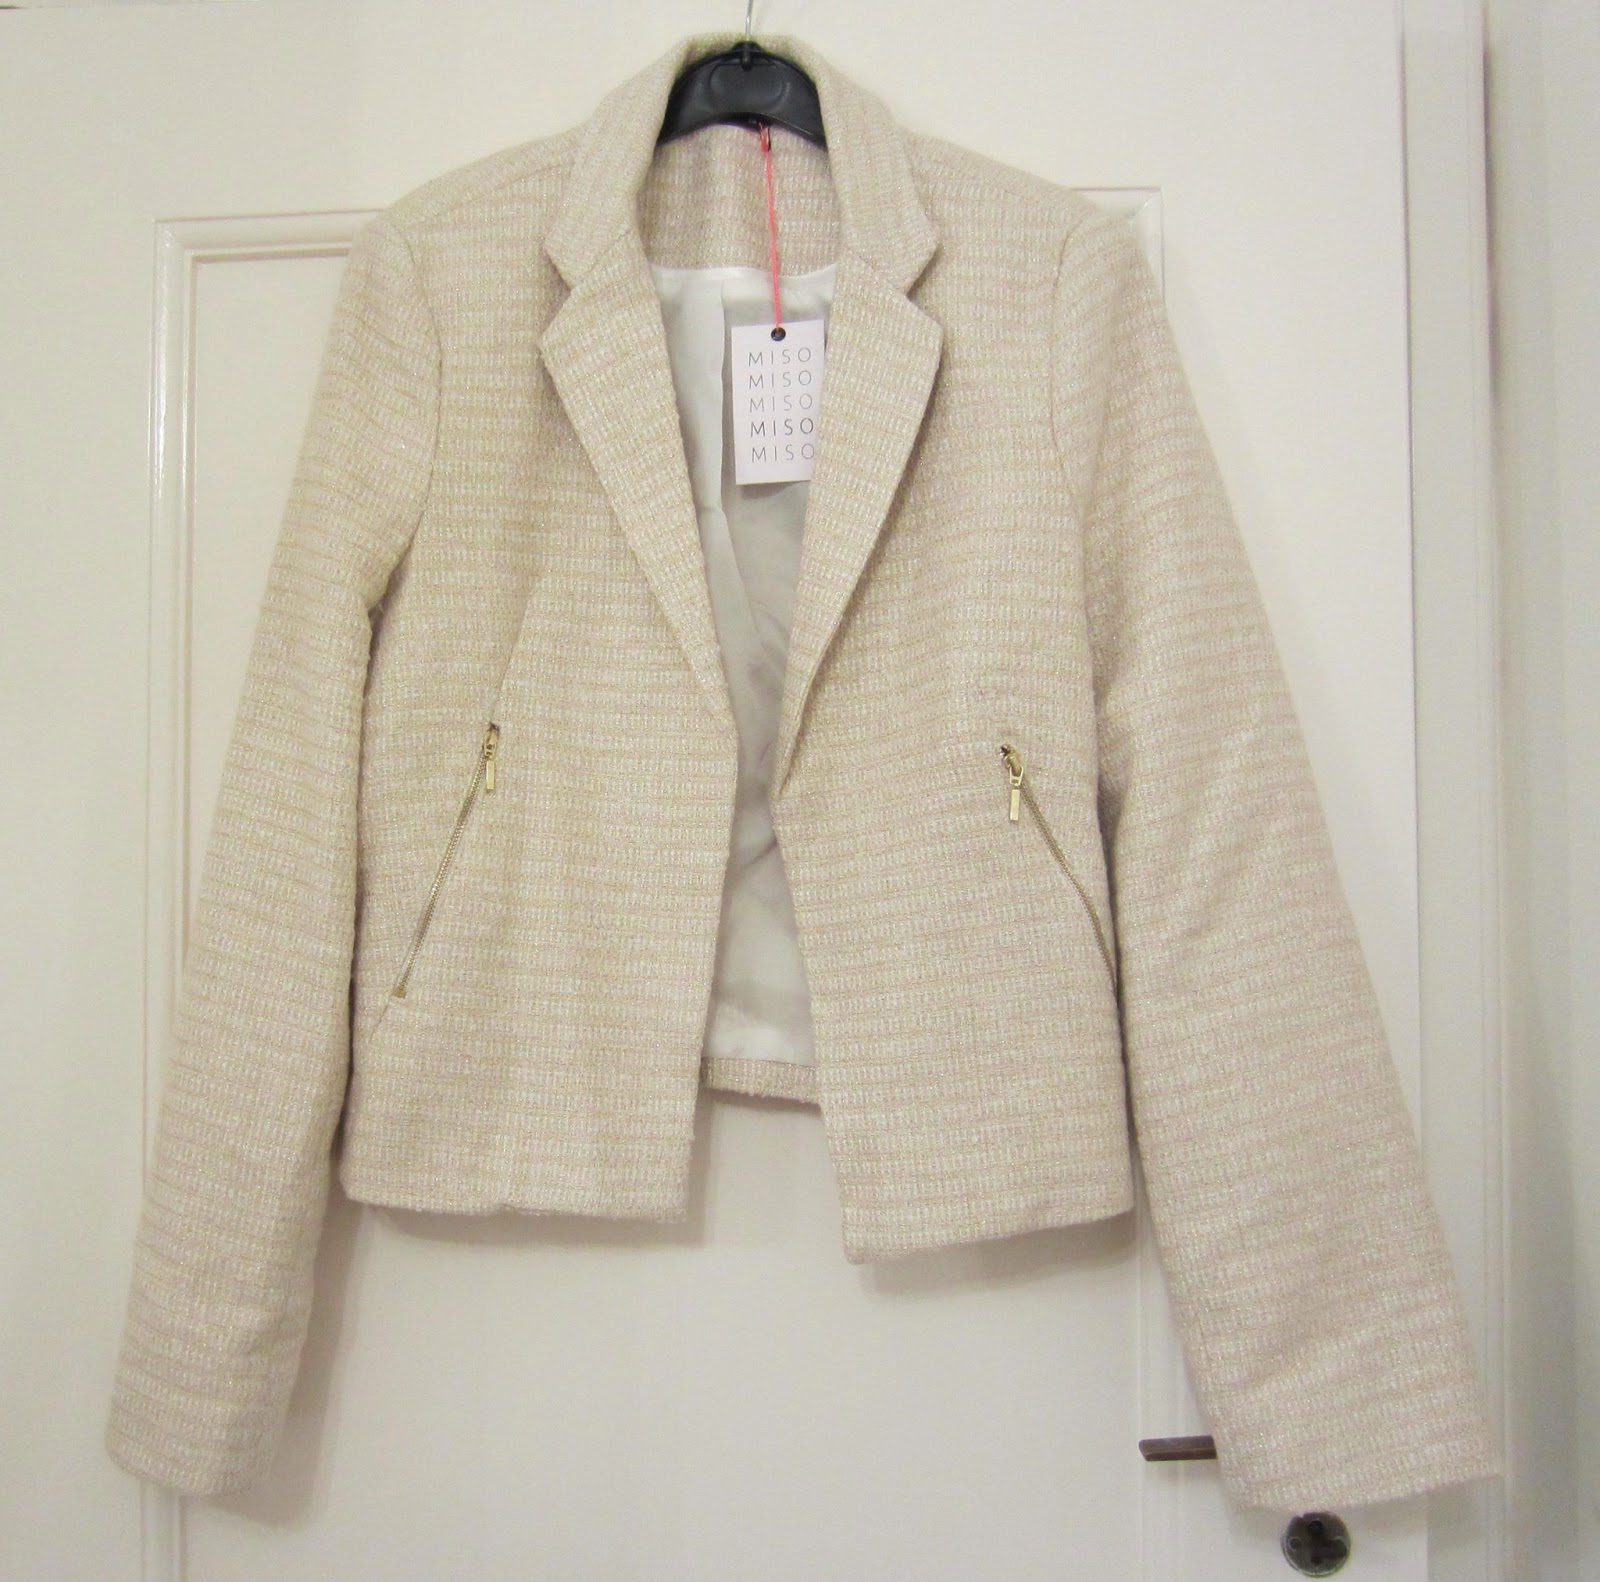 Bella and Robot: Chanel style boucle jacket